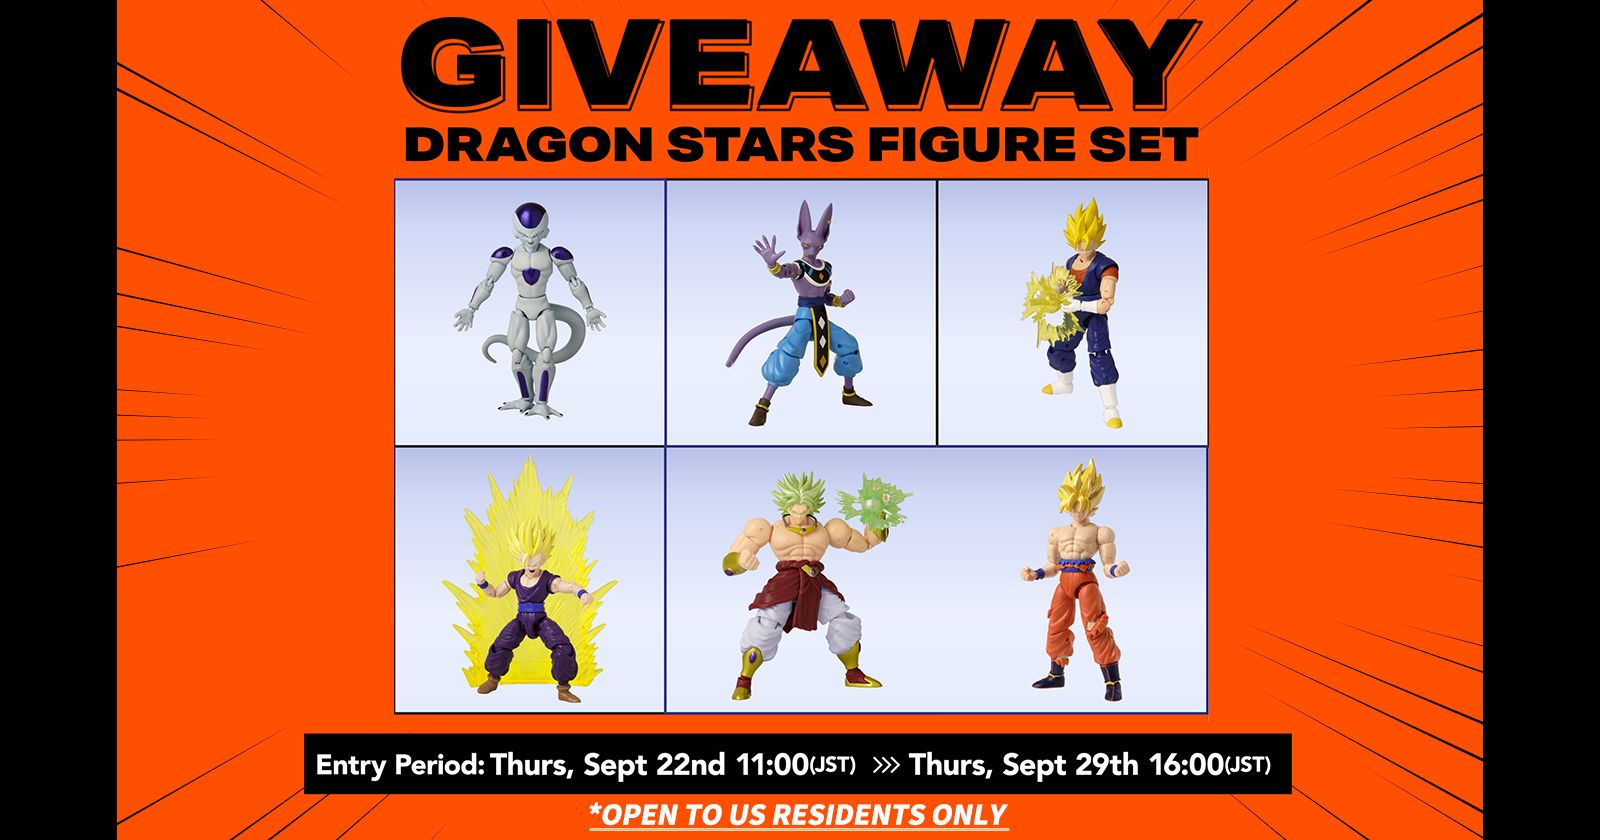 Figure Set Giveaway! Check Out the Twitter Campaign Celebrating the Release of the DATABASE! (Ends 9/28 23:00 PST)